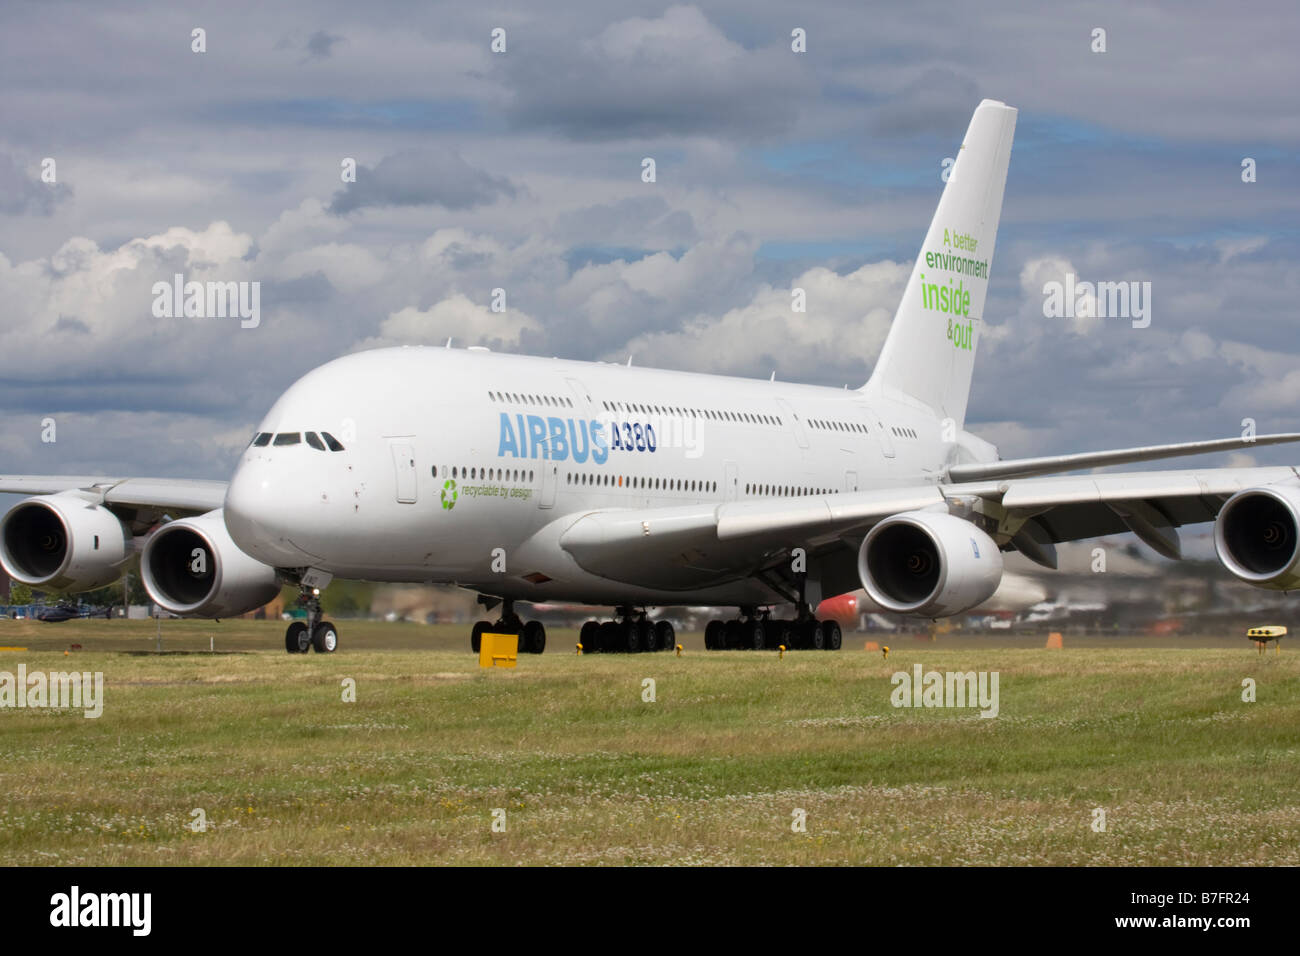 Airbus A380 about to take off on runway at Farnborough International Airshow 2008 UK Stock Photo